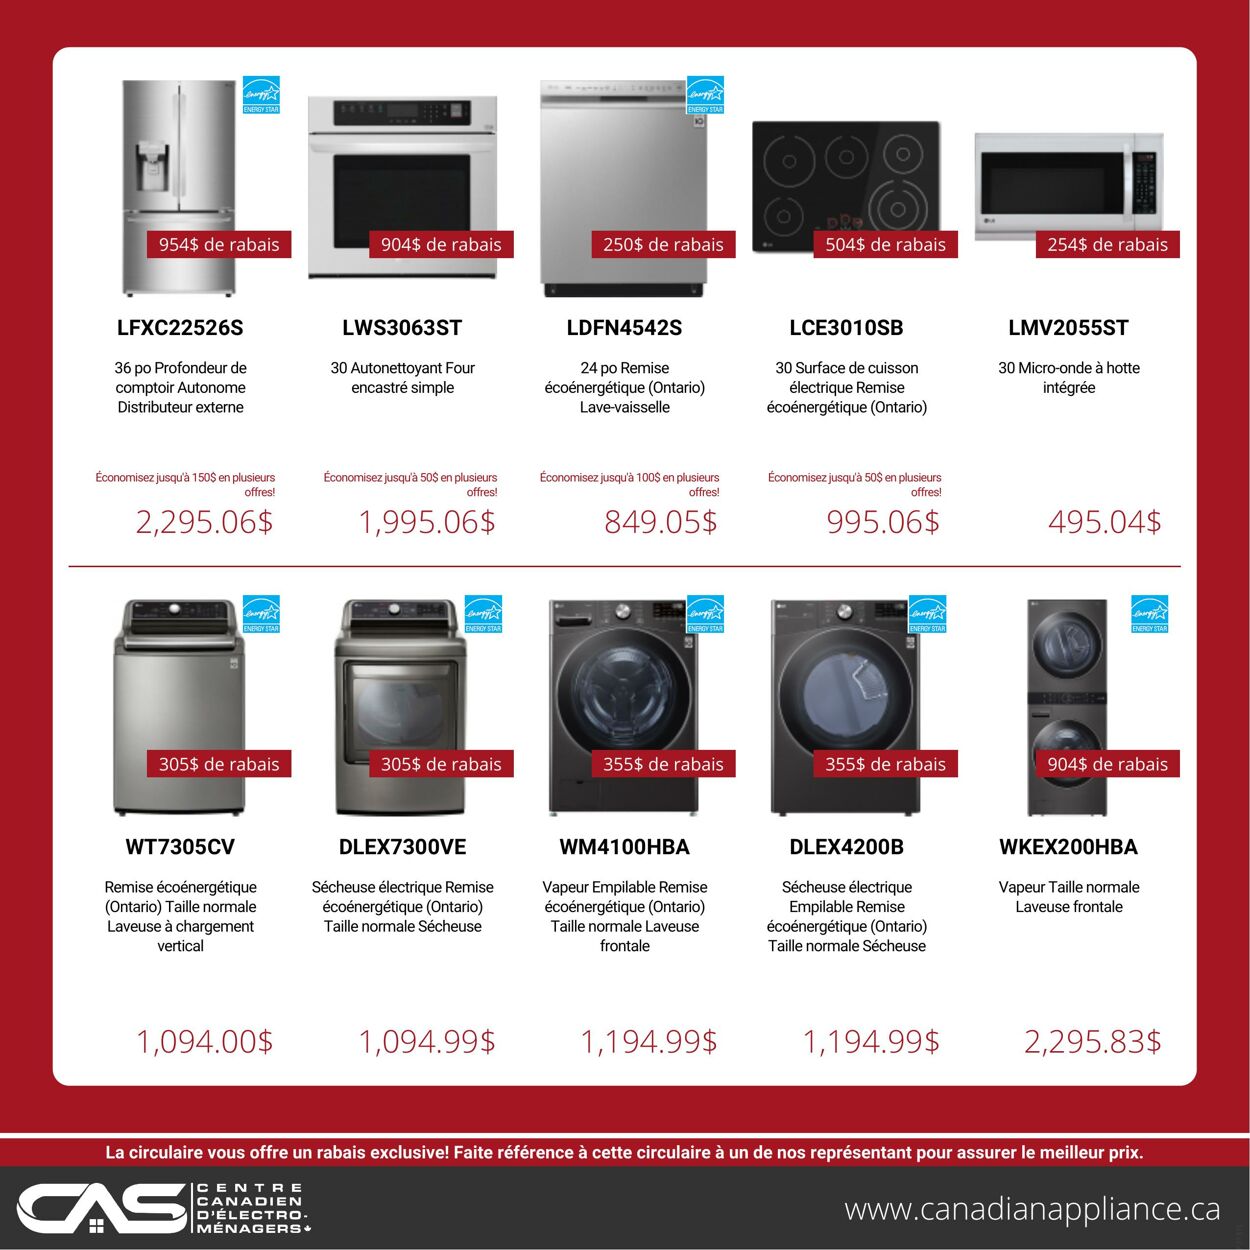 Flyer Canadian Appliance Source 23.12.2021 - 29.12.2021